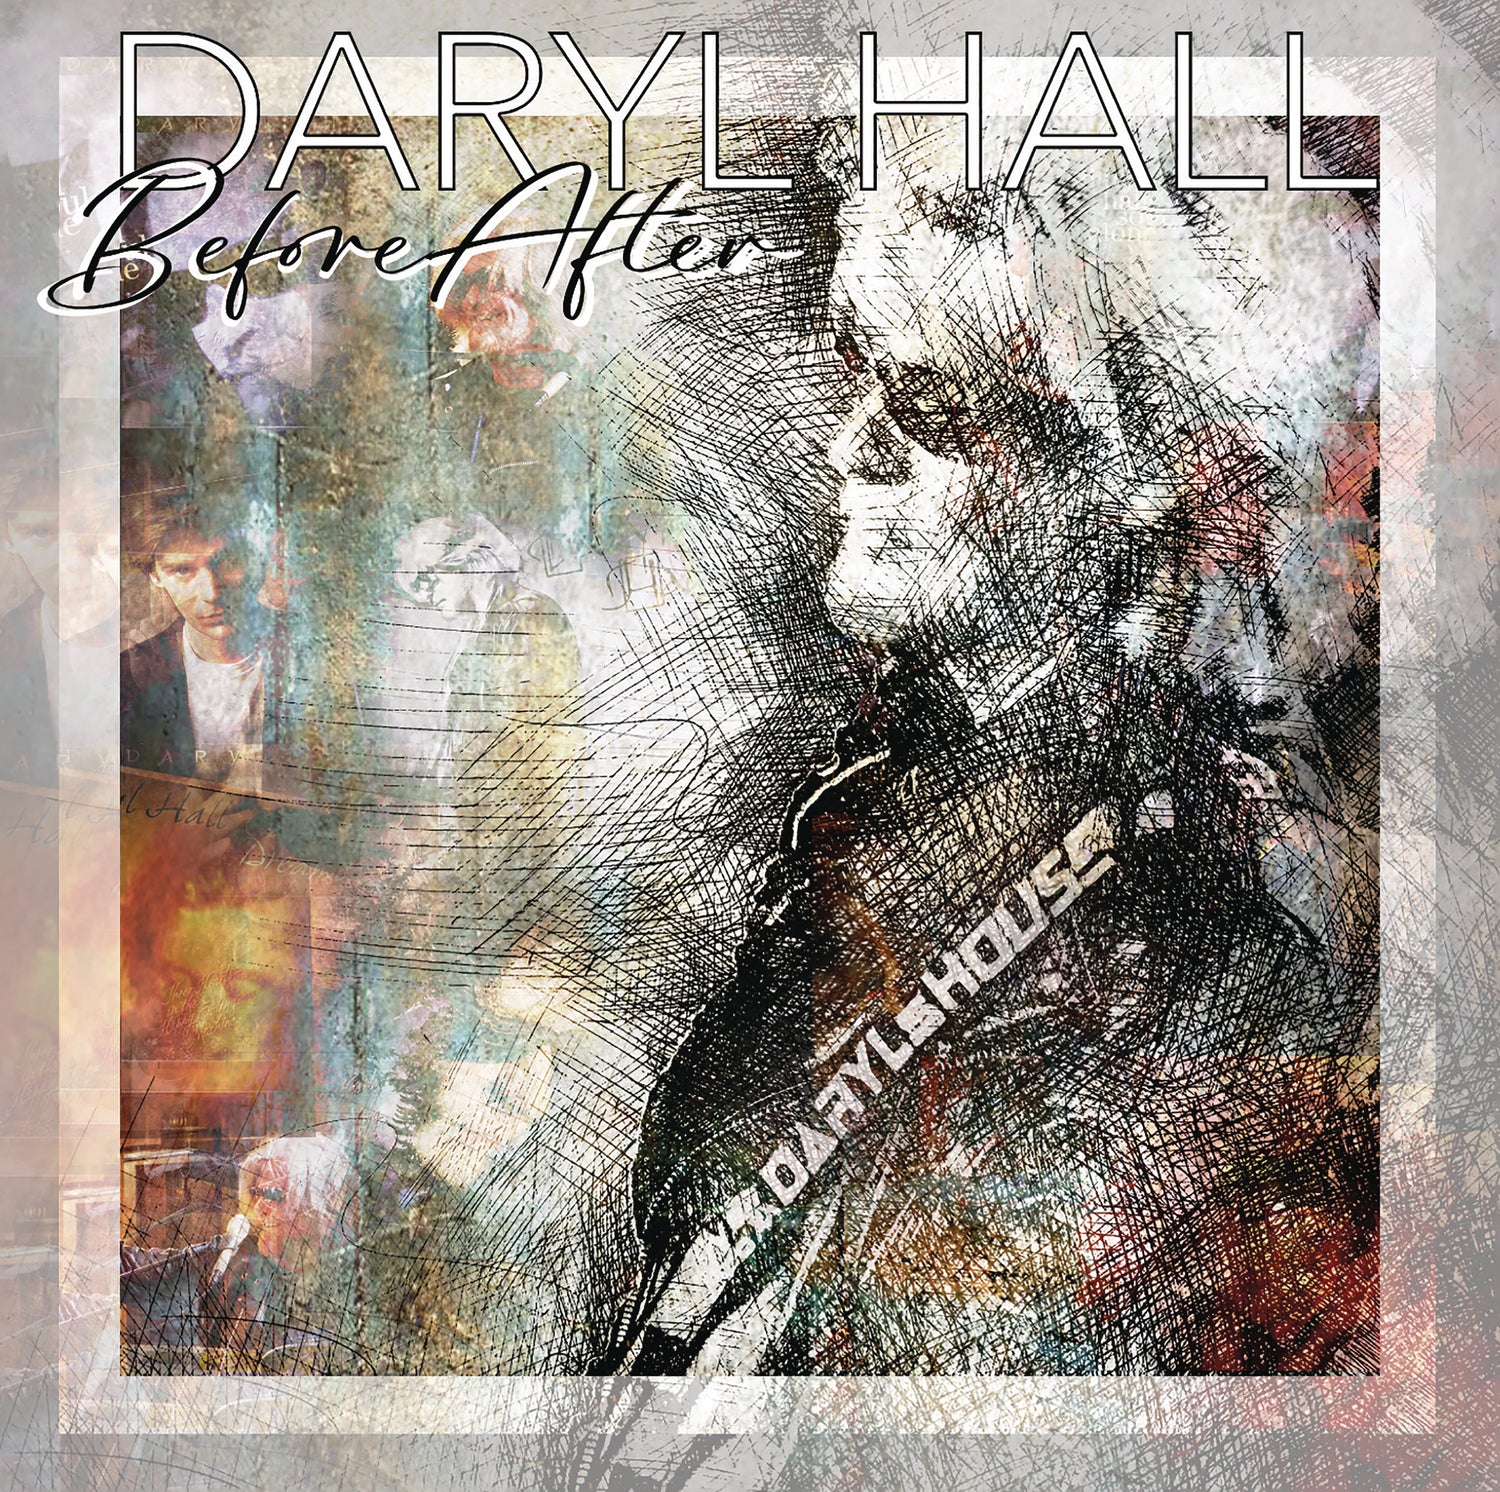 Daryl Hall | Before After | CD